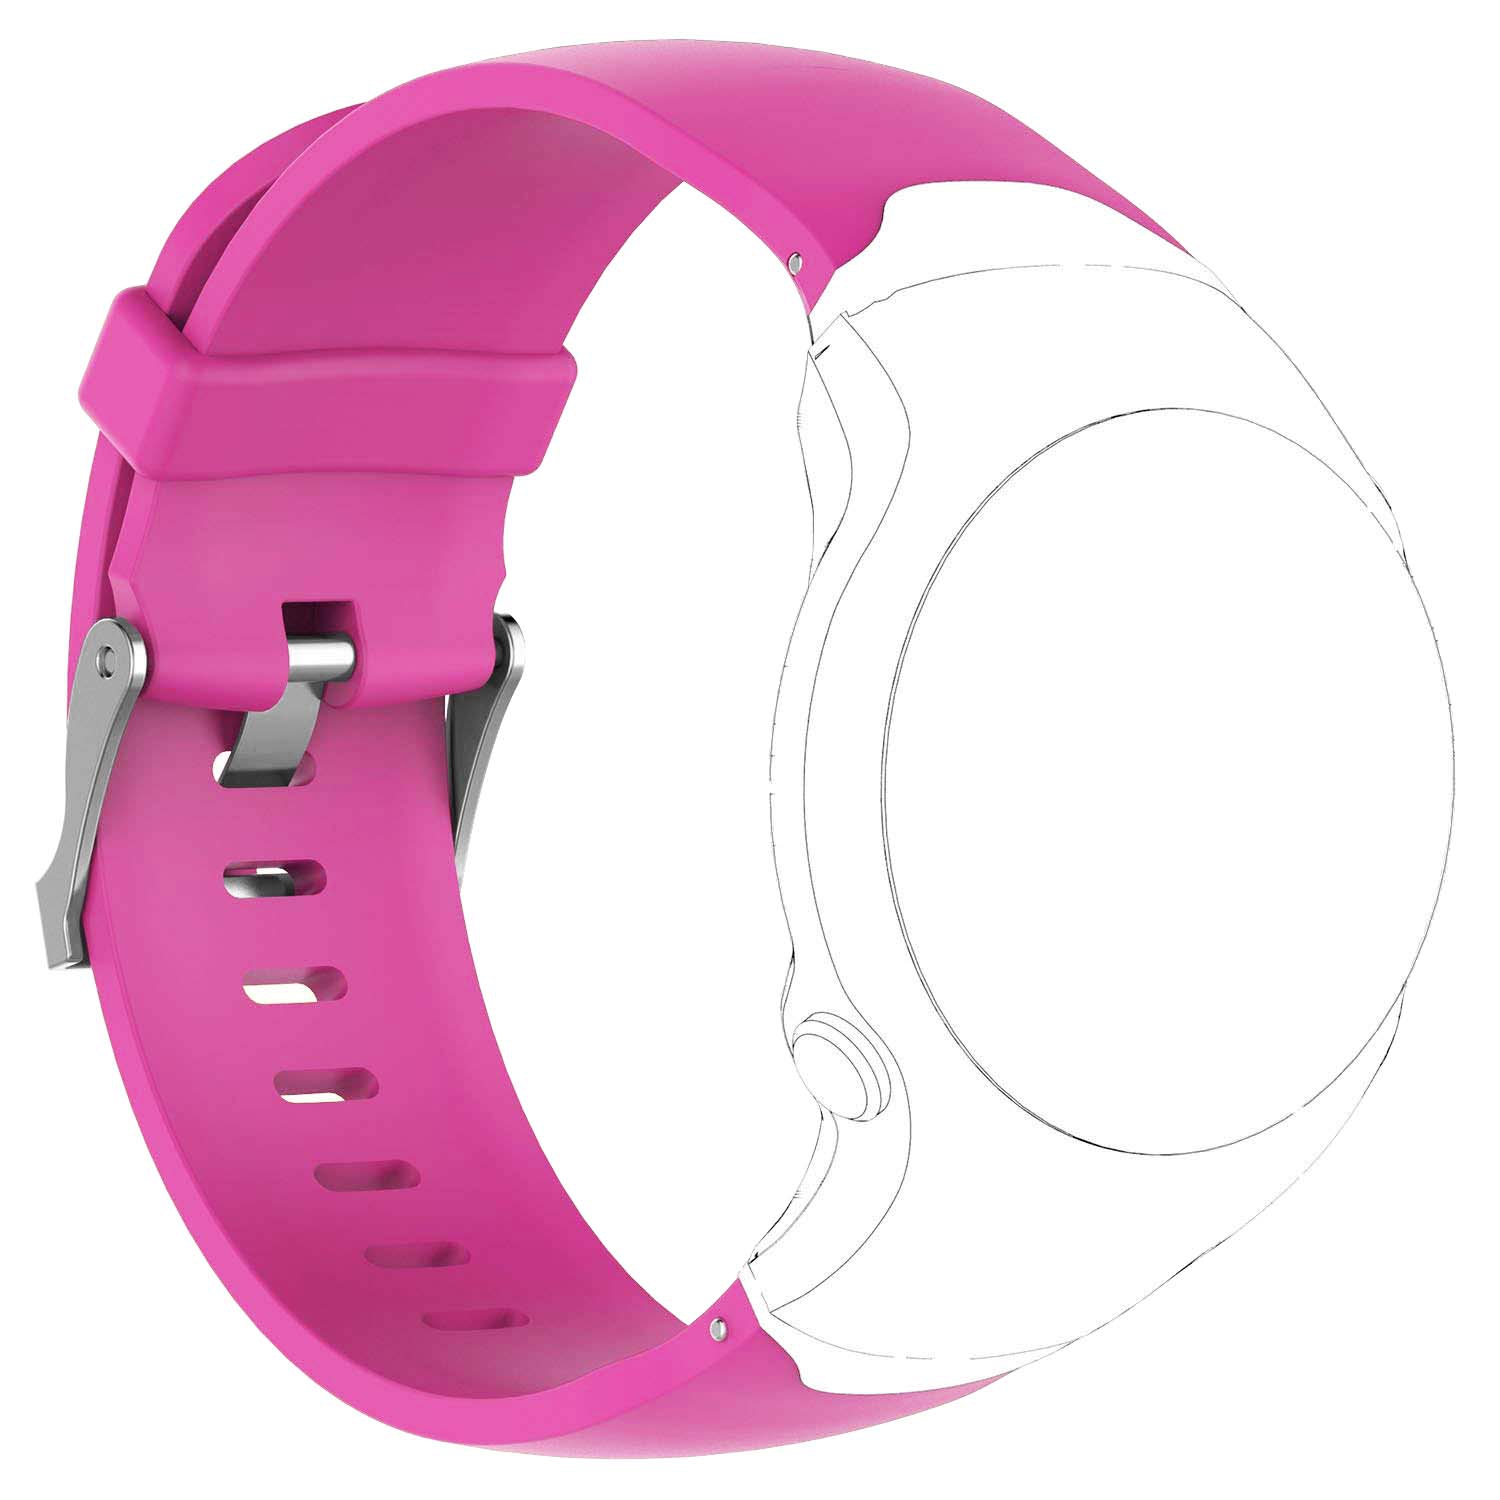 StrapsCo Classic Silicone Rubber Replacement Watch Band Strap (with tool & pins) for Garmin Approach S3 - Fuchsia